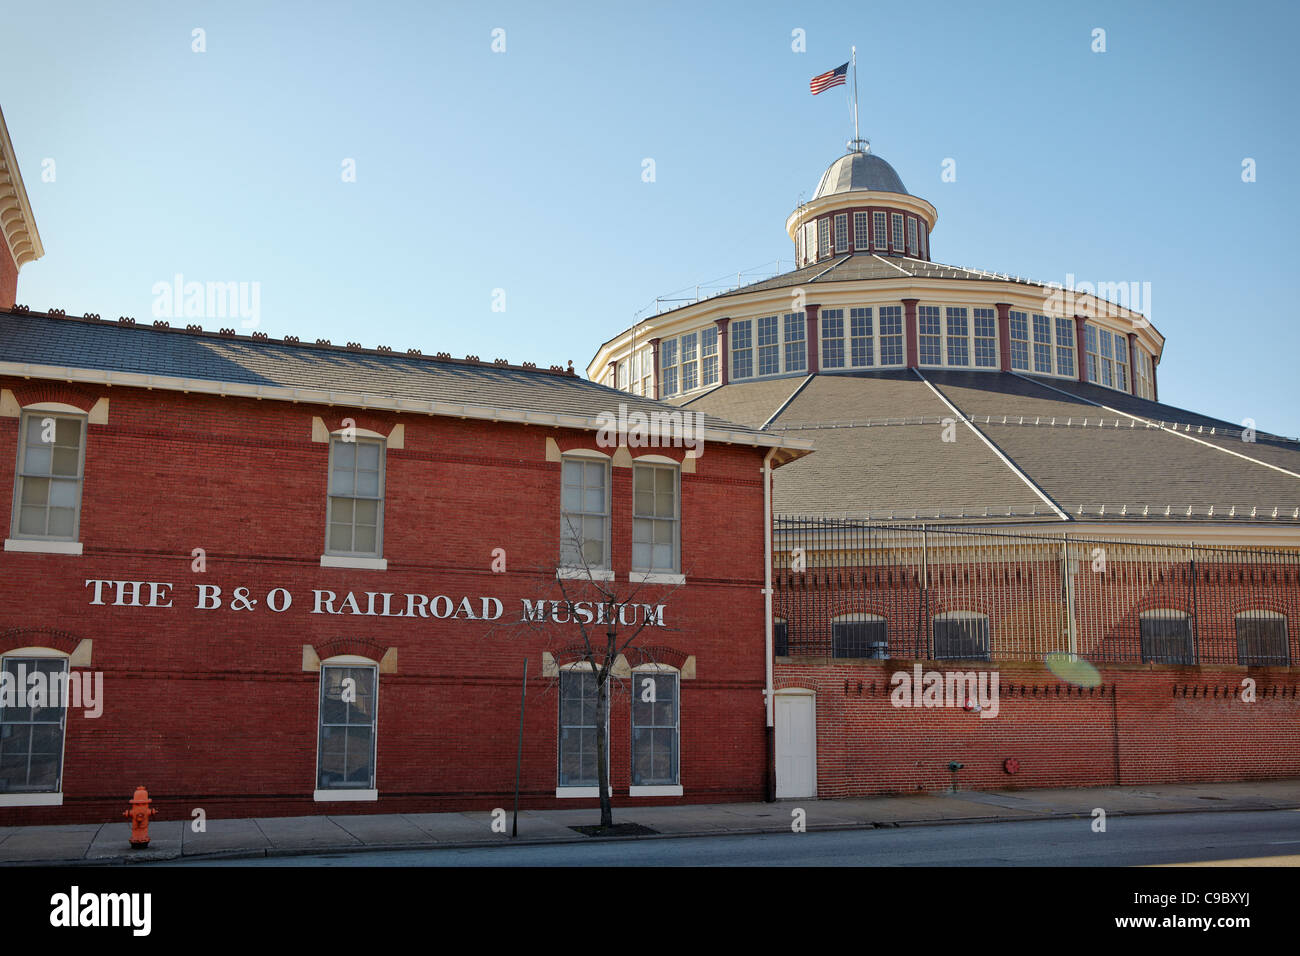 The exterior of the B&O Railroad Museum, Baltimore, Maryland. Stock Photo